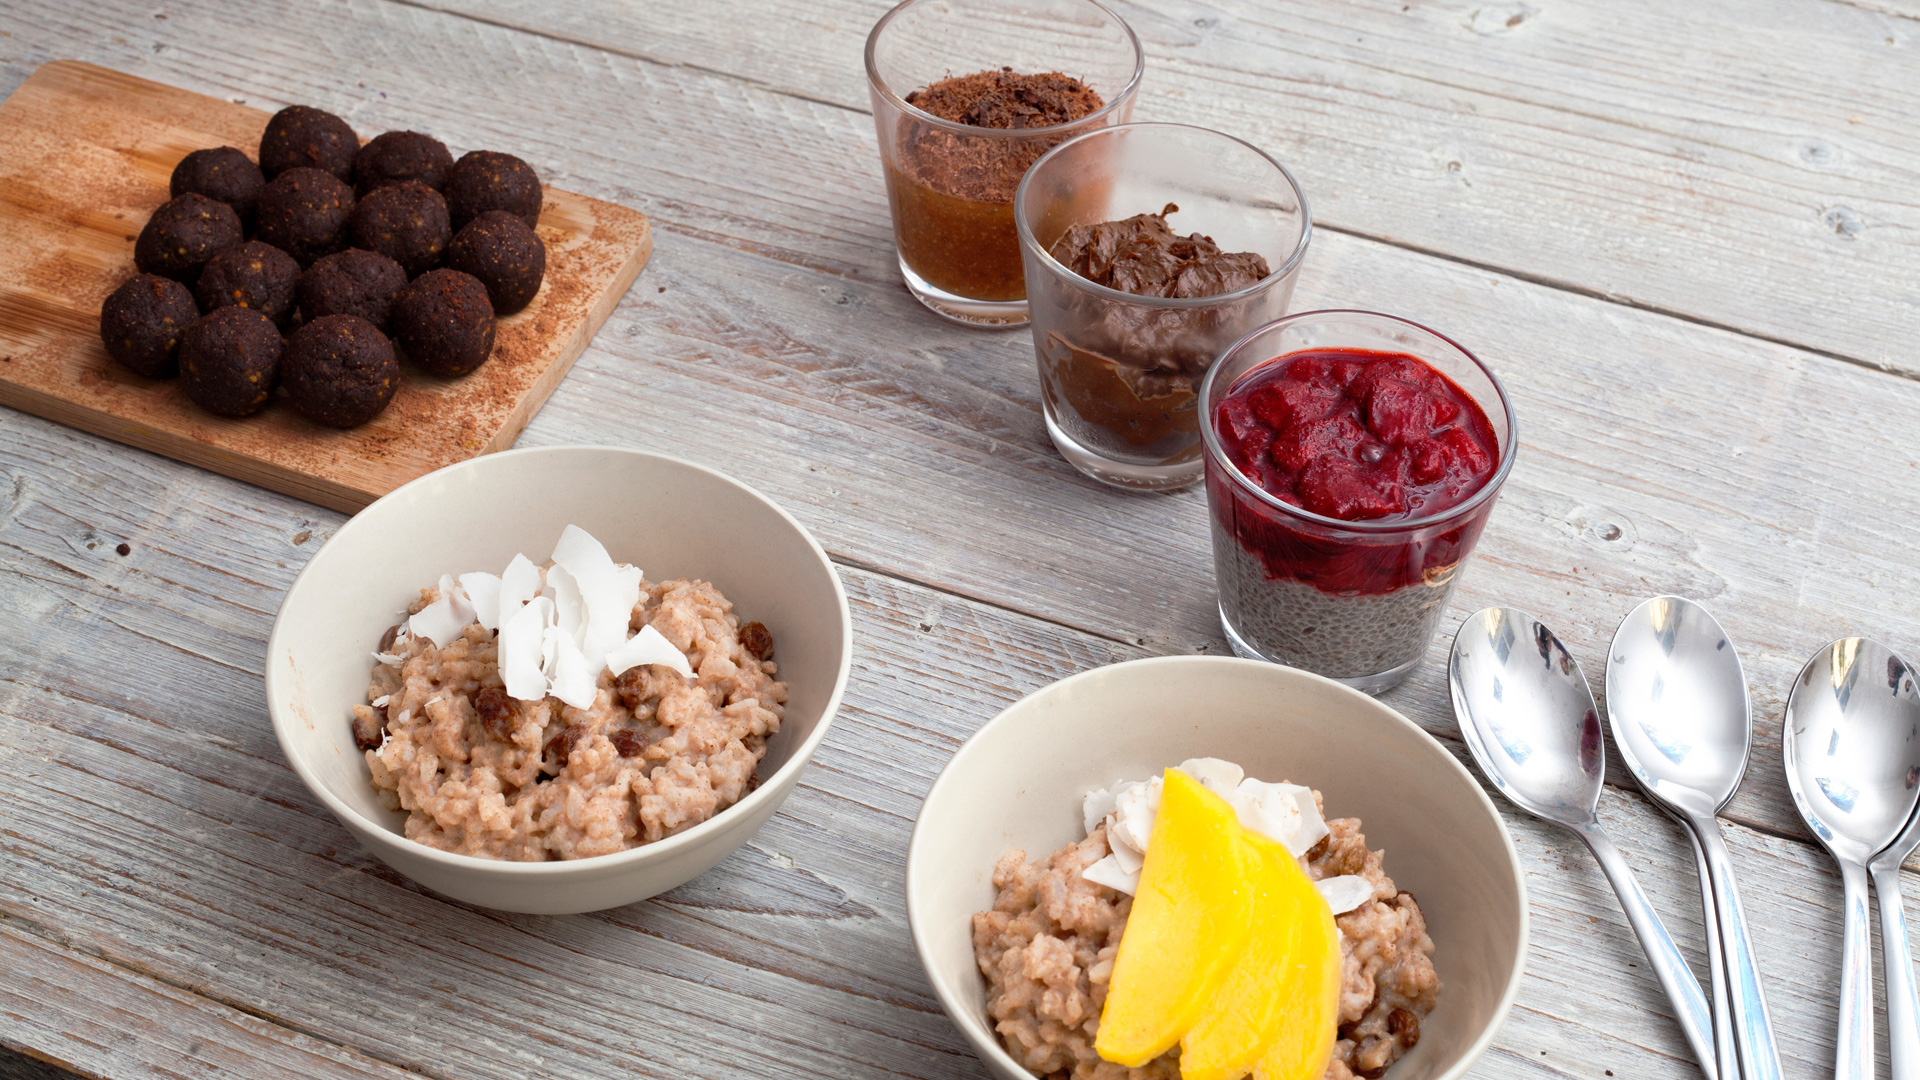 Linsey Boersbroek created a selection of delicious and healthy desserts and snacks for Foodadit.